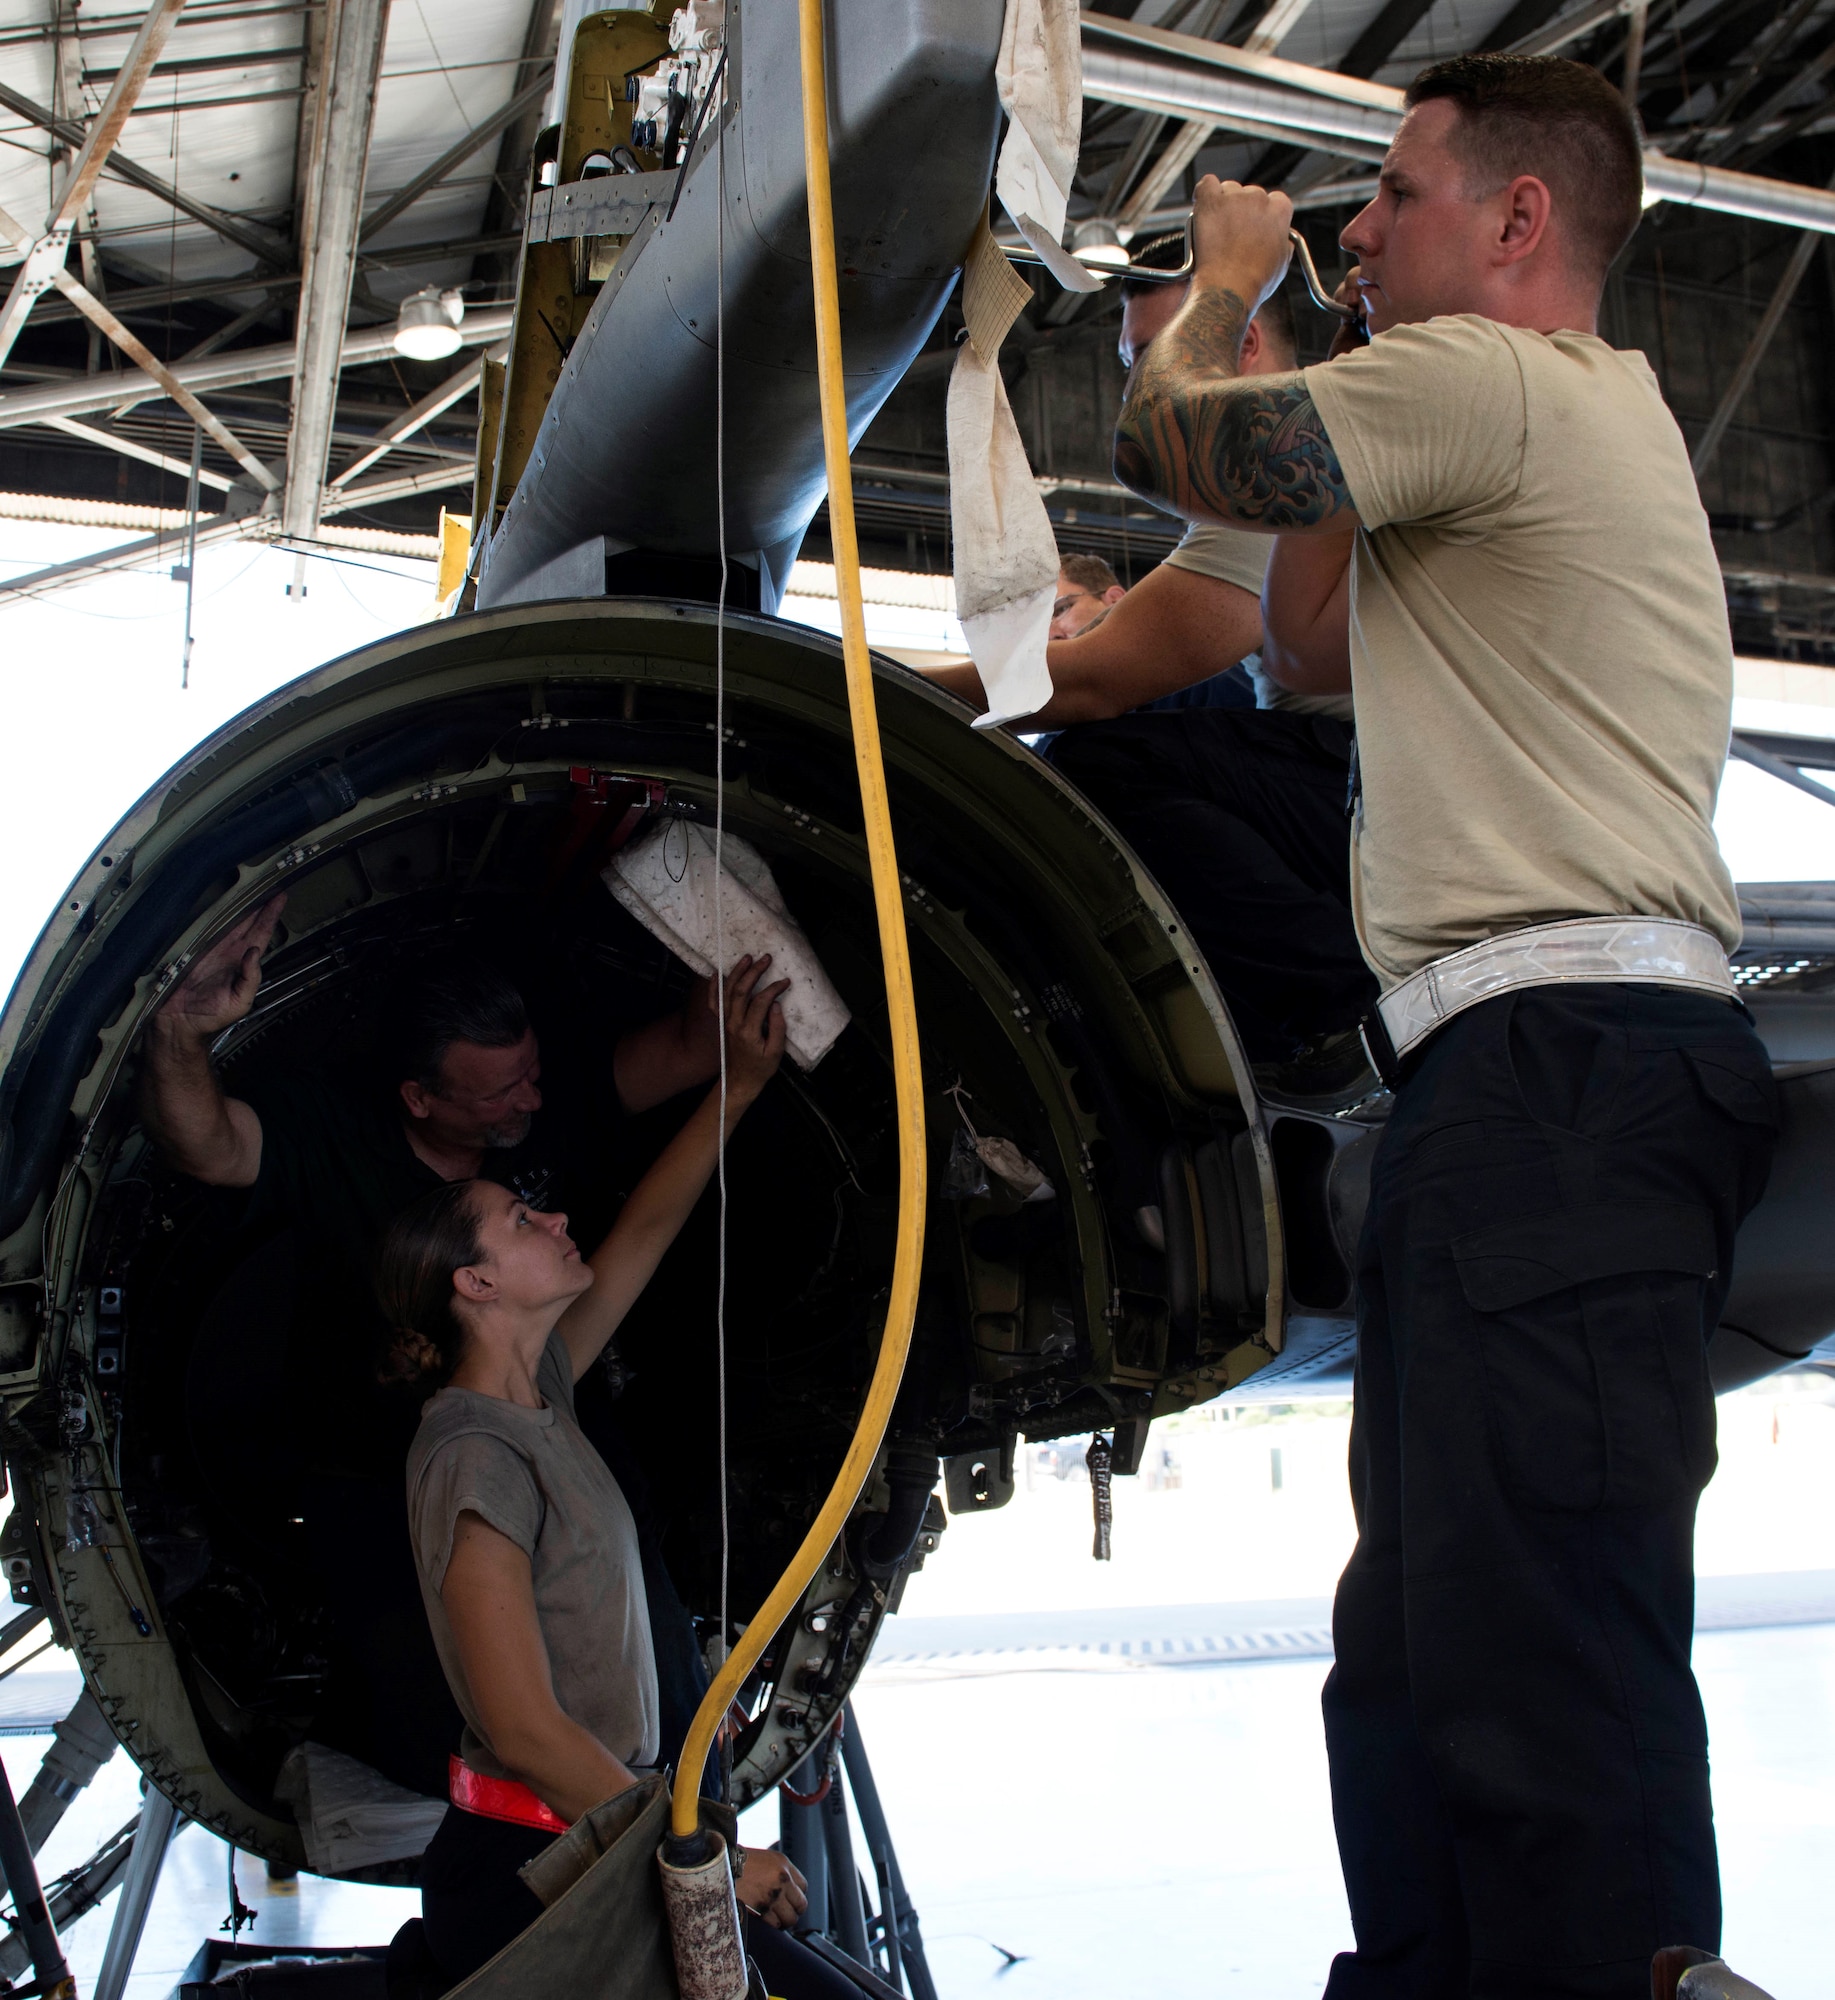 Members of the 20th Aircraft Maintenance Squadron loosen bolts on an F-16 Fighting Falcon at Shaw Air Force Base, S.C., Sept. 6, 2018.